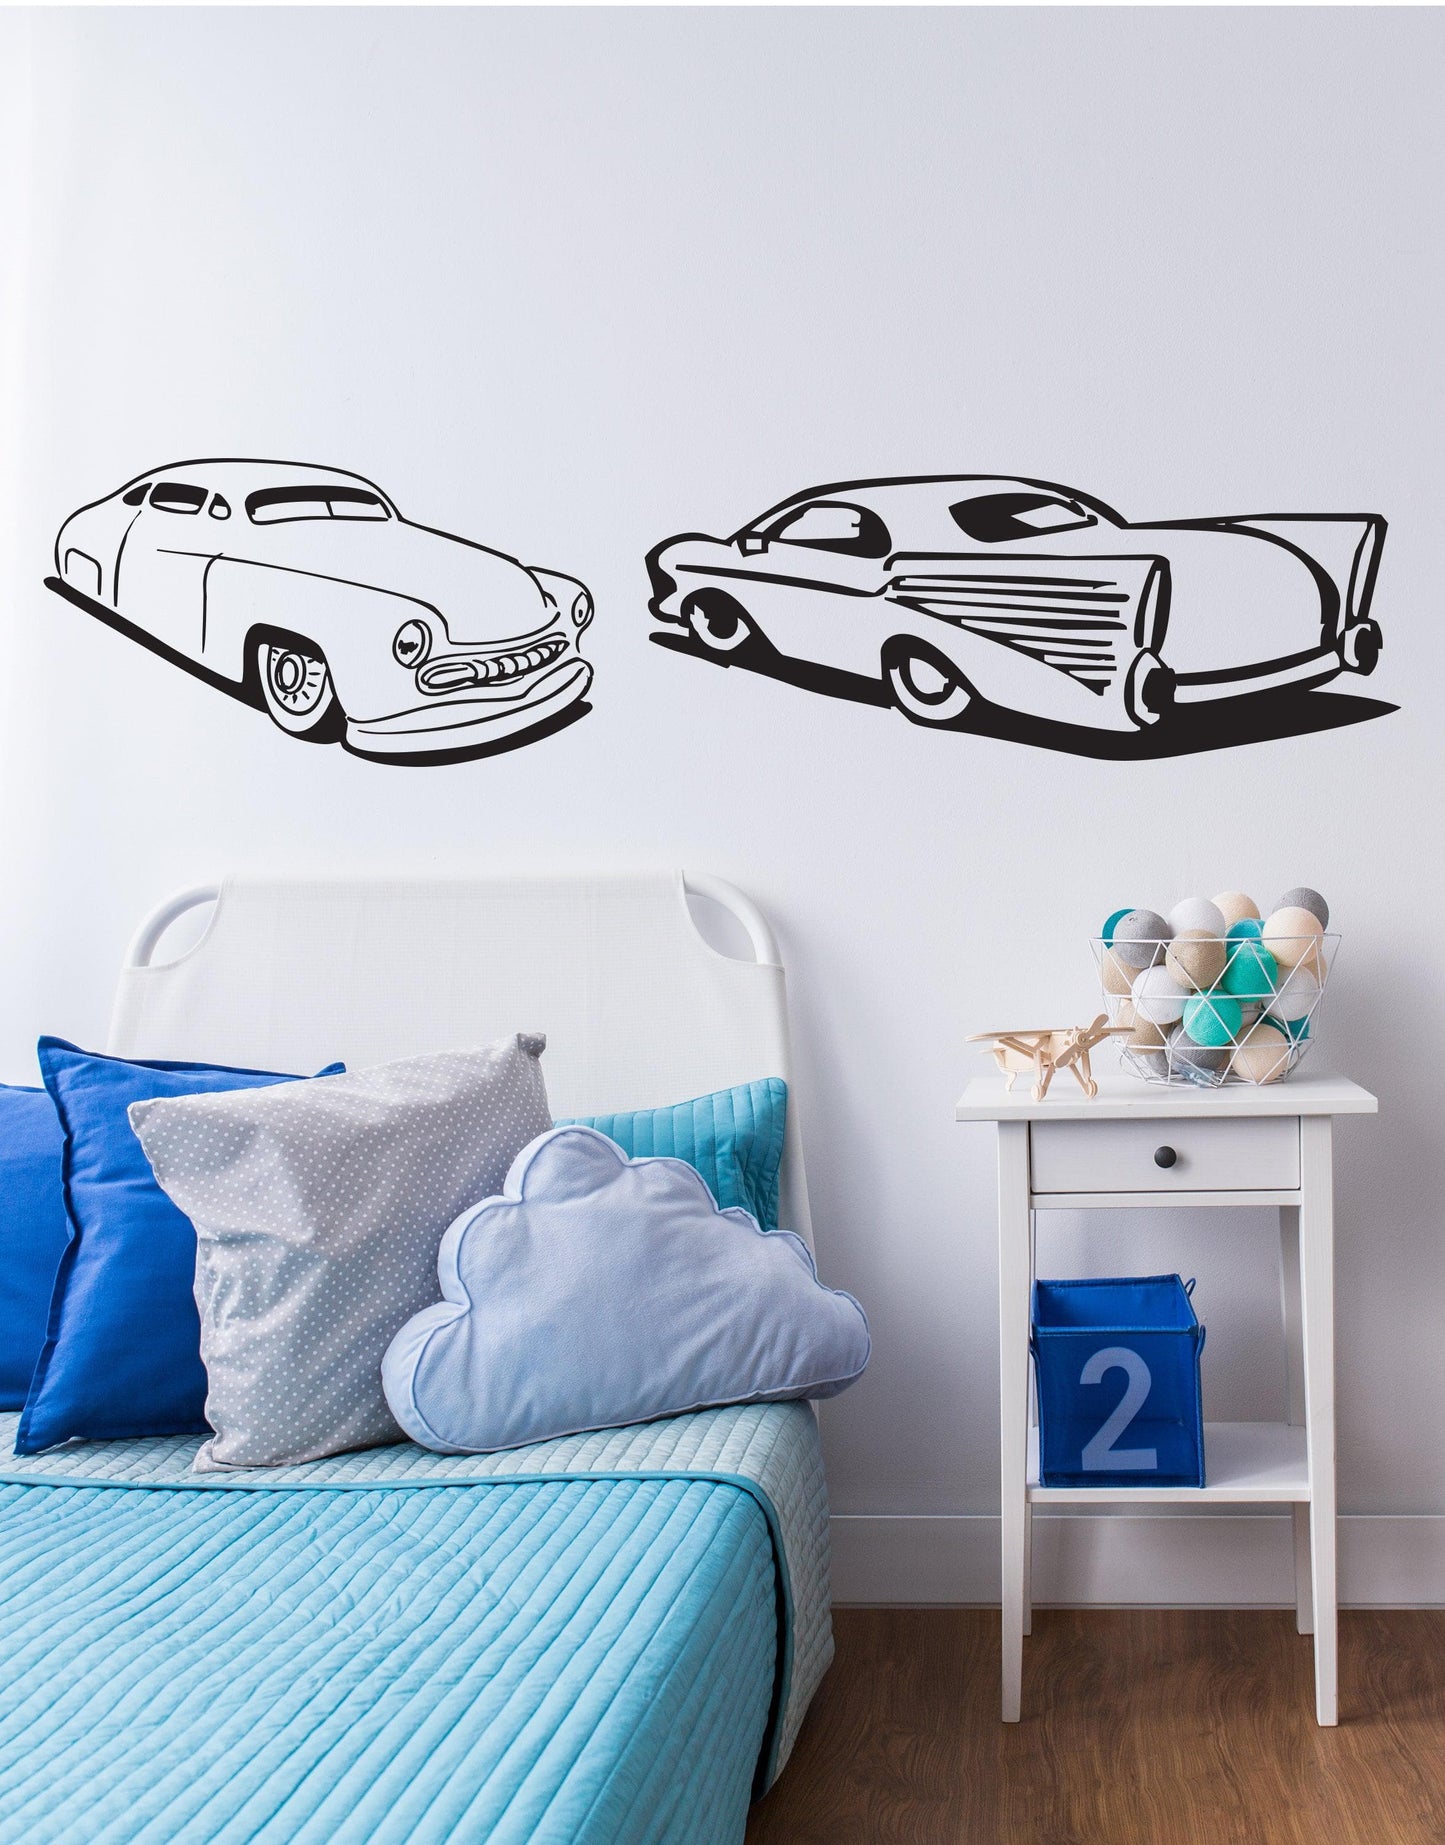 2 Classic Hot Rod Wall Decals. (Pair Set) #398